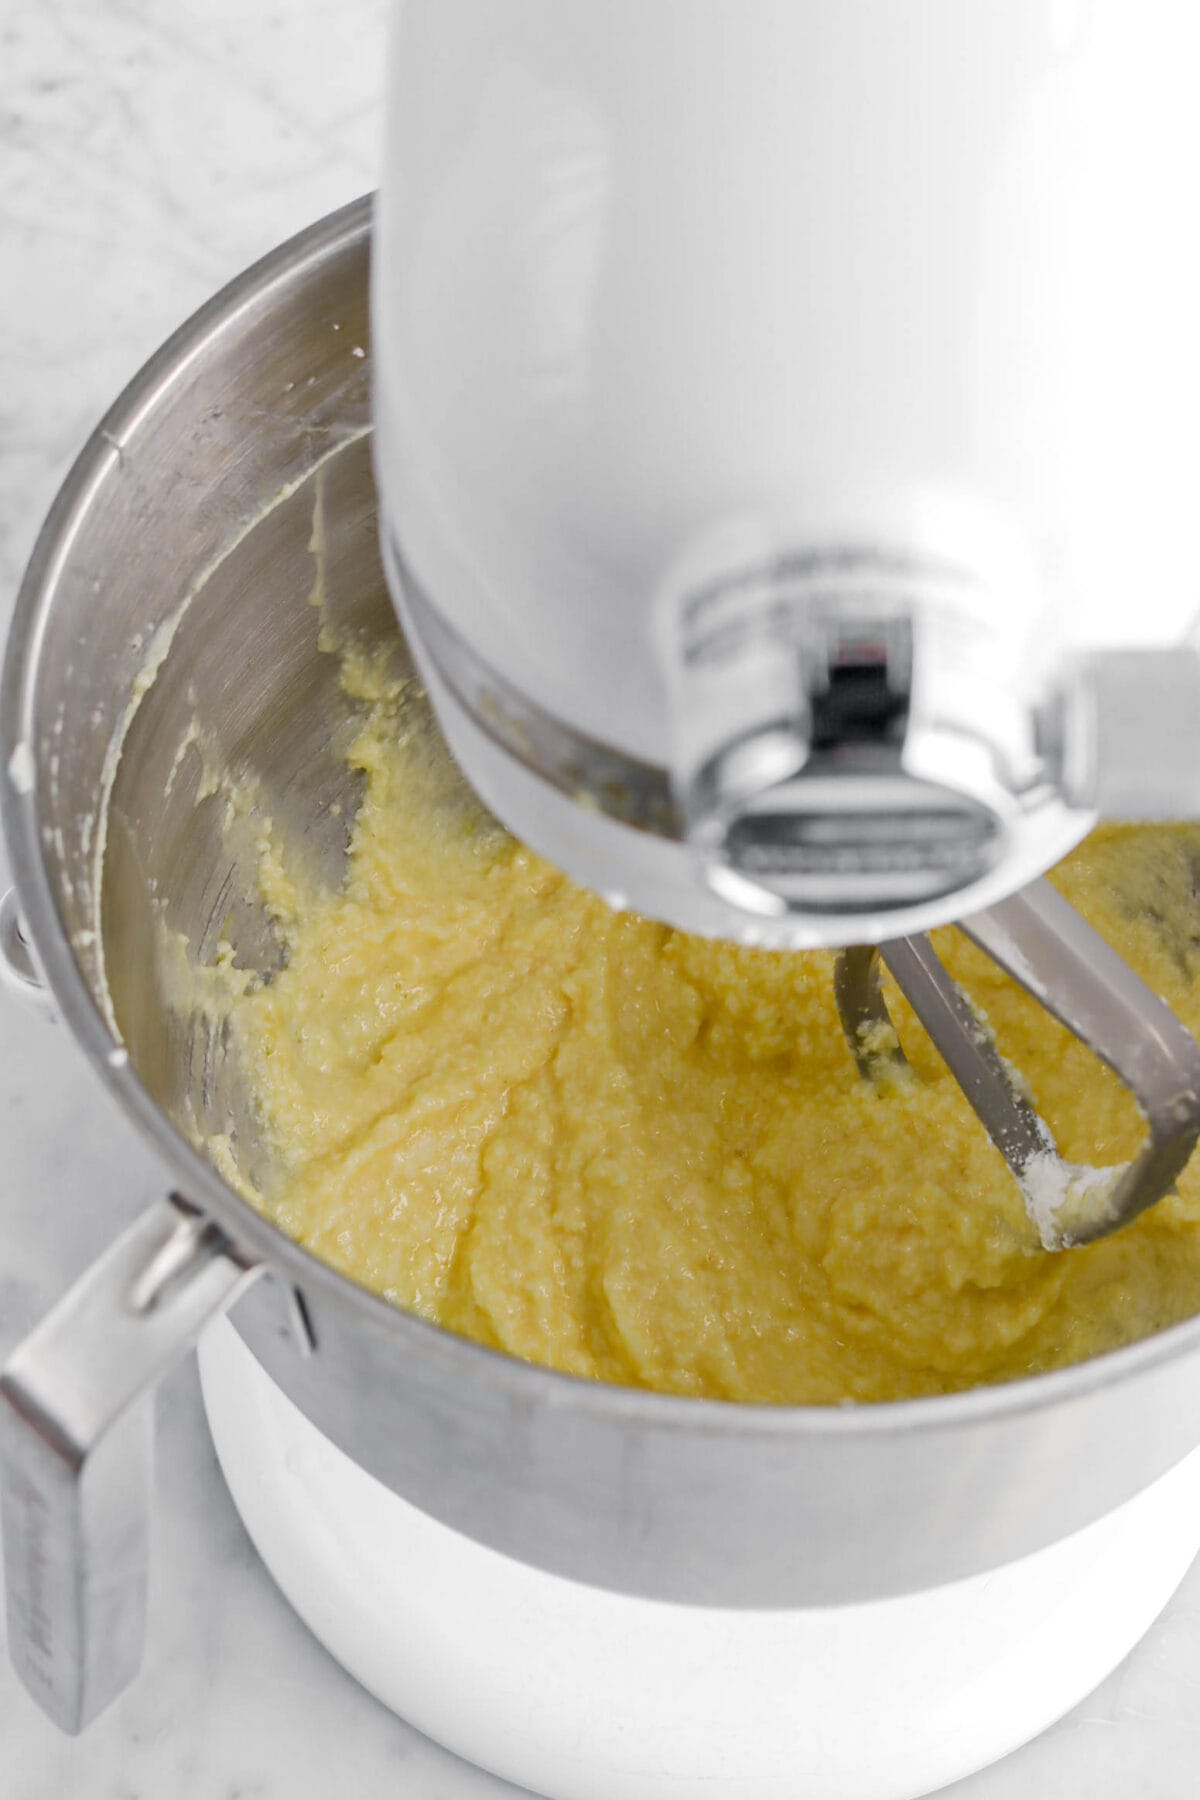 flour stirred into butter mixture.